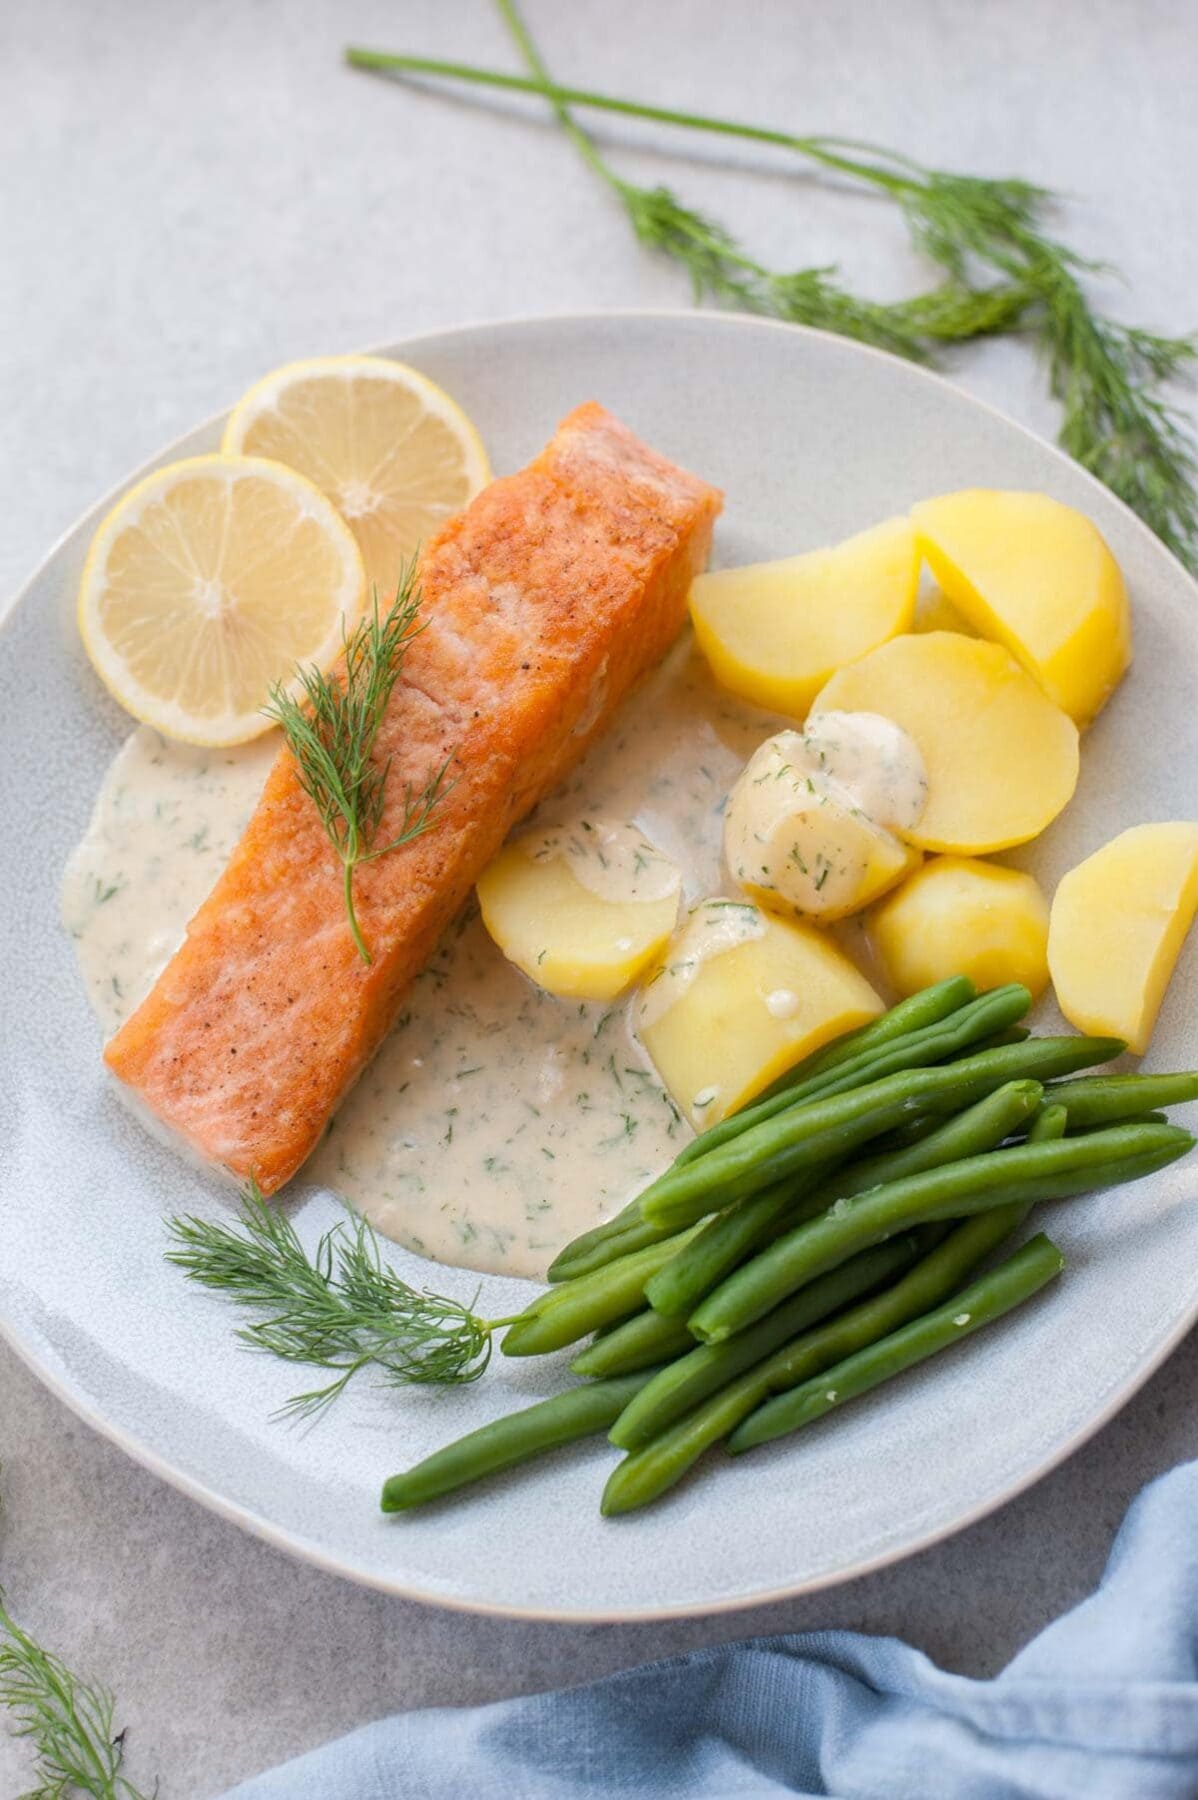 Salmon with creamy dill sauce, potatoes and green beans on a white plate.